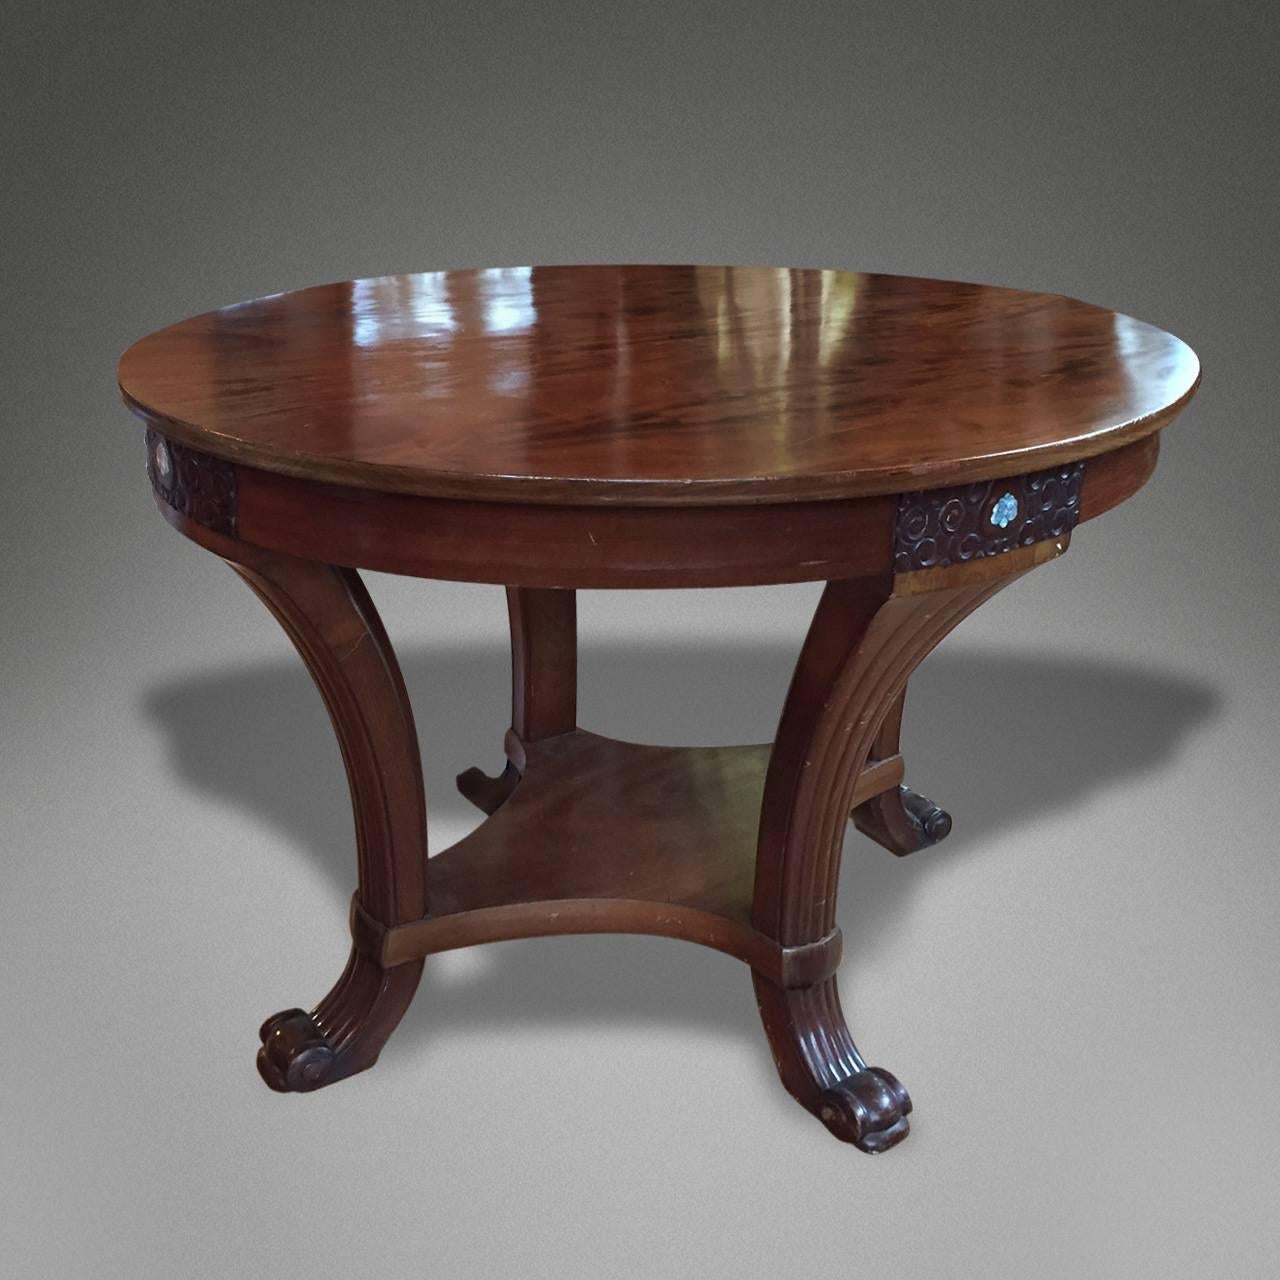 Art Nouveau walnut occasional table, with decorative carving and mother-of-pearl inlaid motifs